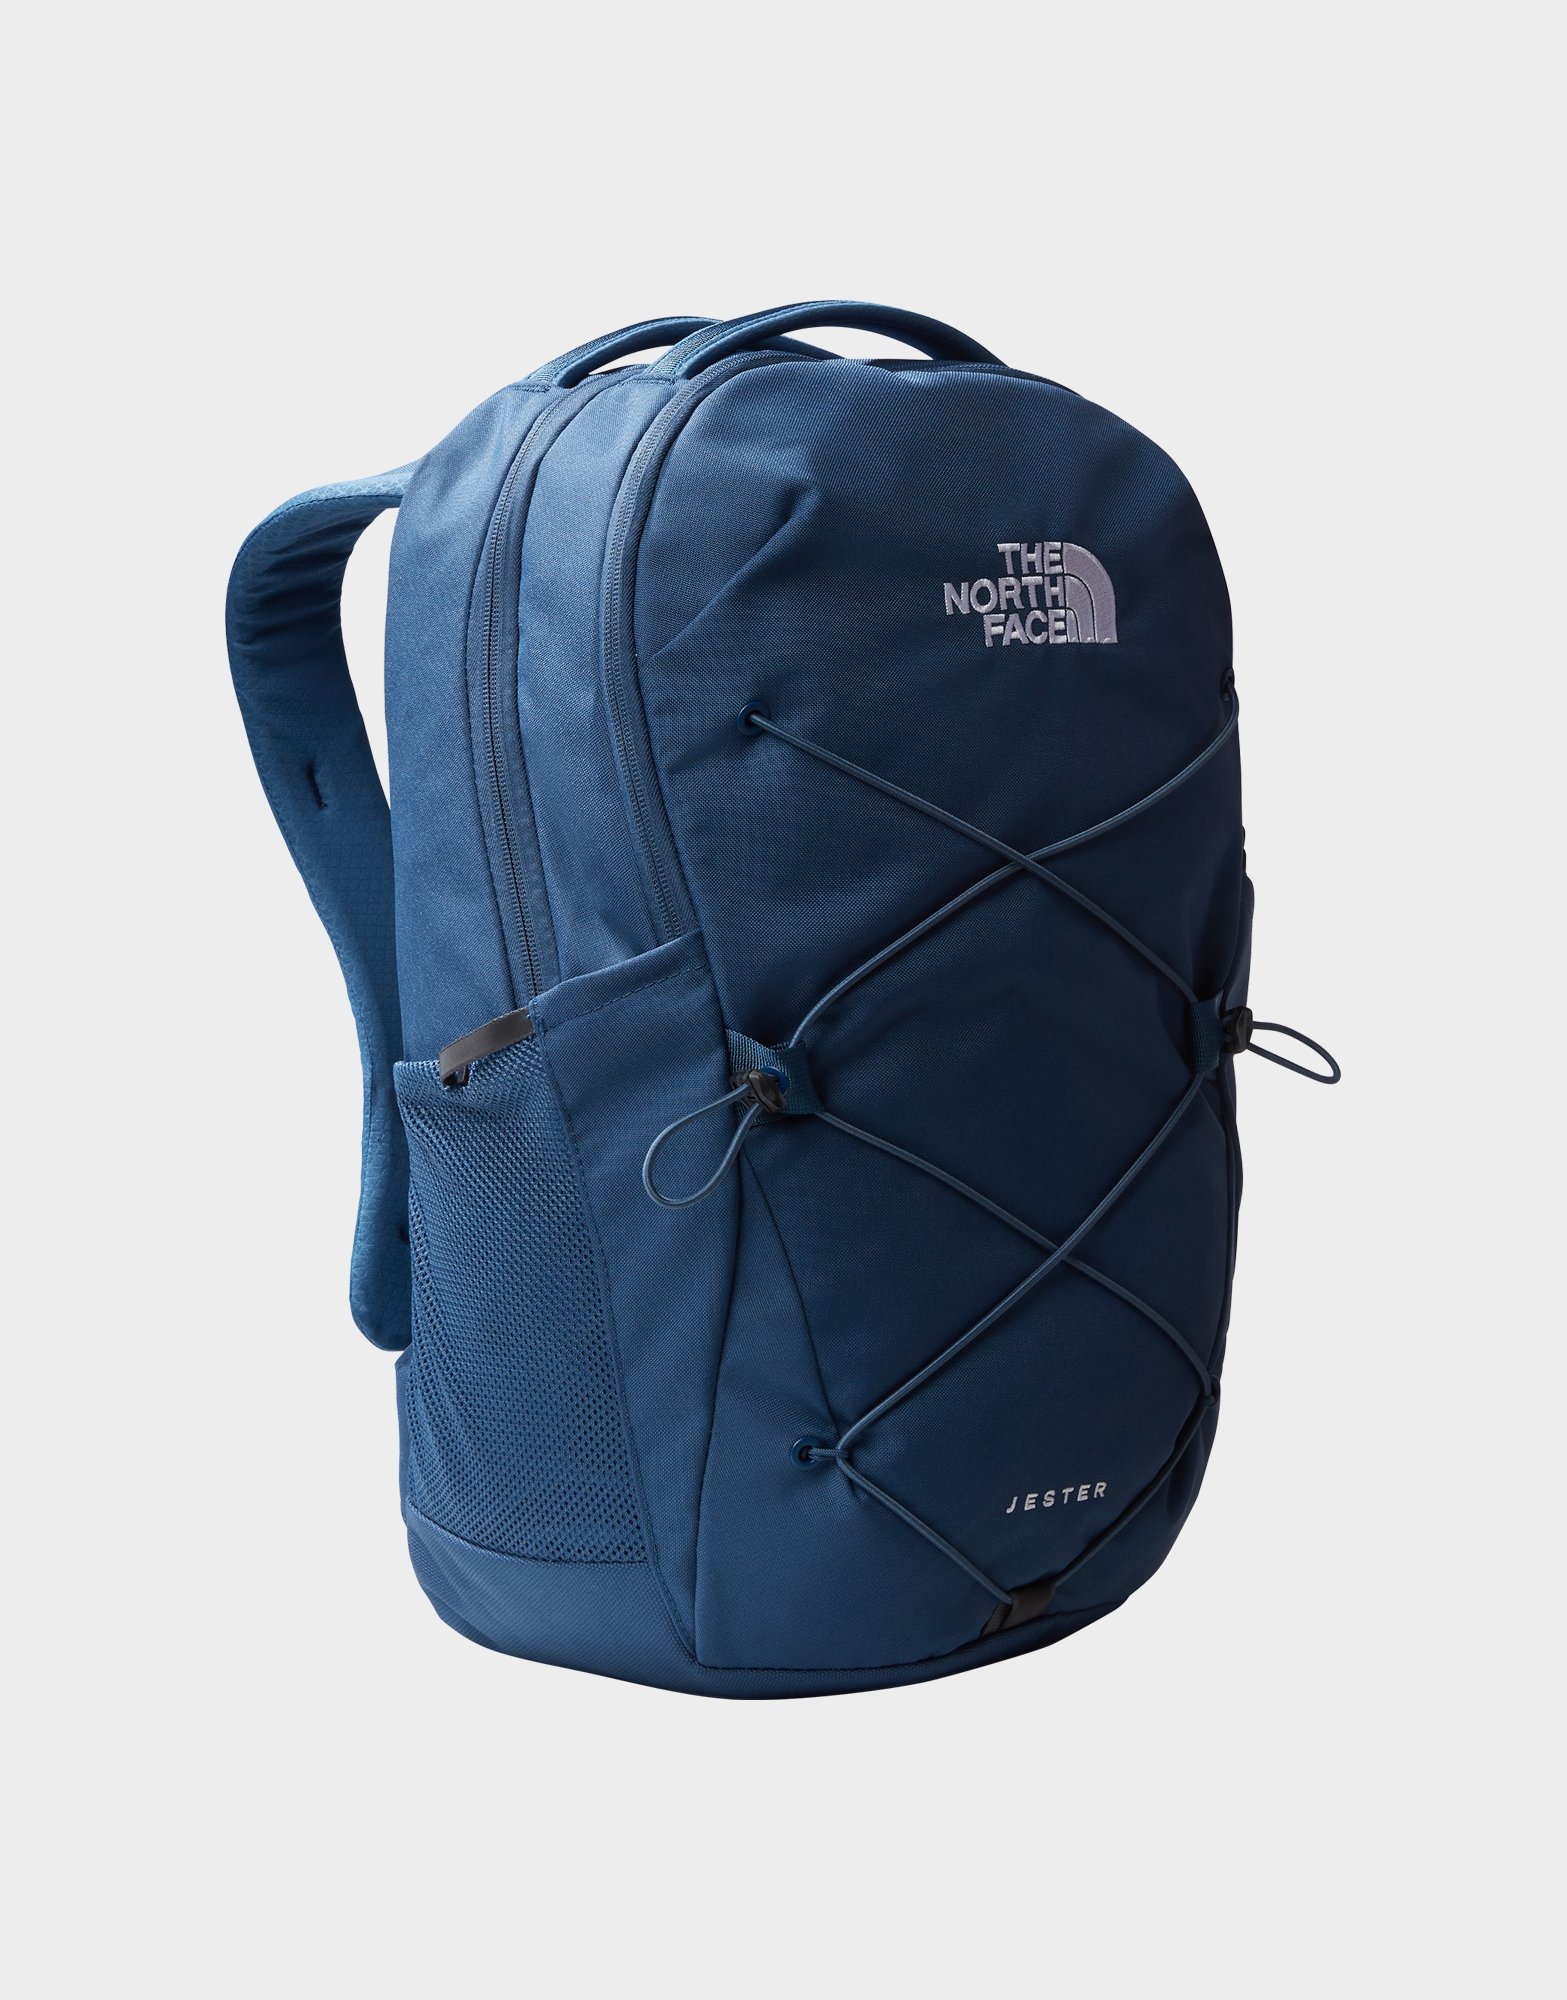 Blue The North Face JESTER | JD Sports UK